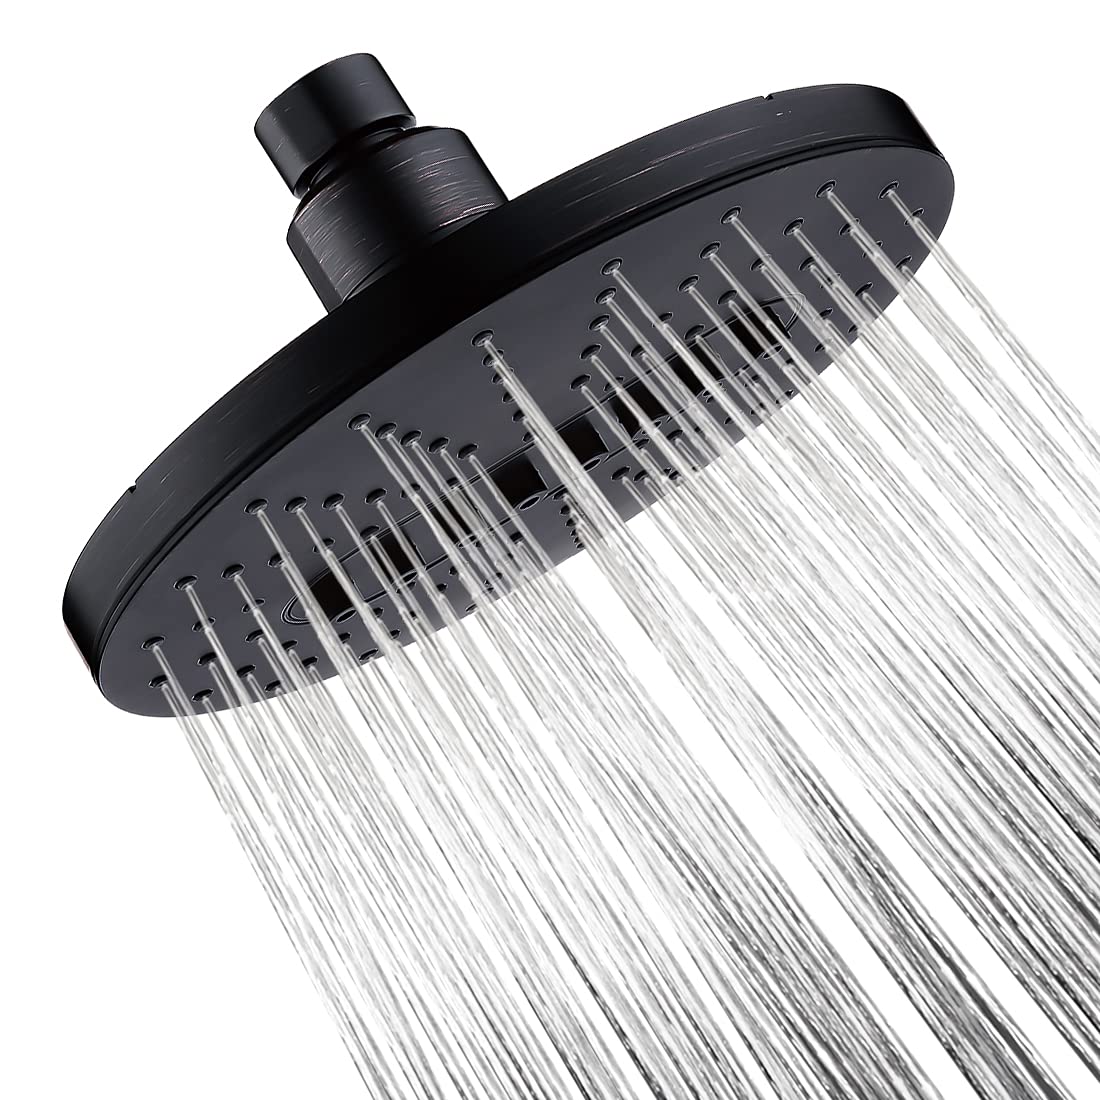 Rainfall Shower Head Fixed Showerhead, 6.3 Inch Rain Showerhead, 2-Setting with Adjustable Angles, Awesome Shower Experience, Tool Free Installation, Oil Rubbed Bronze